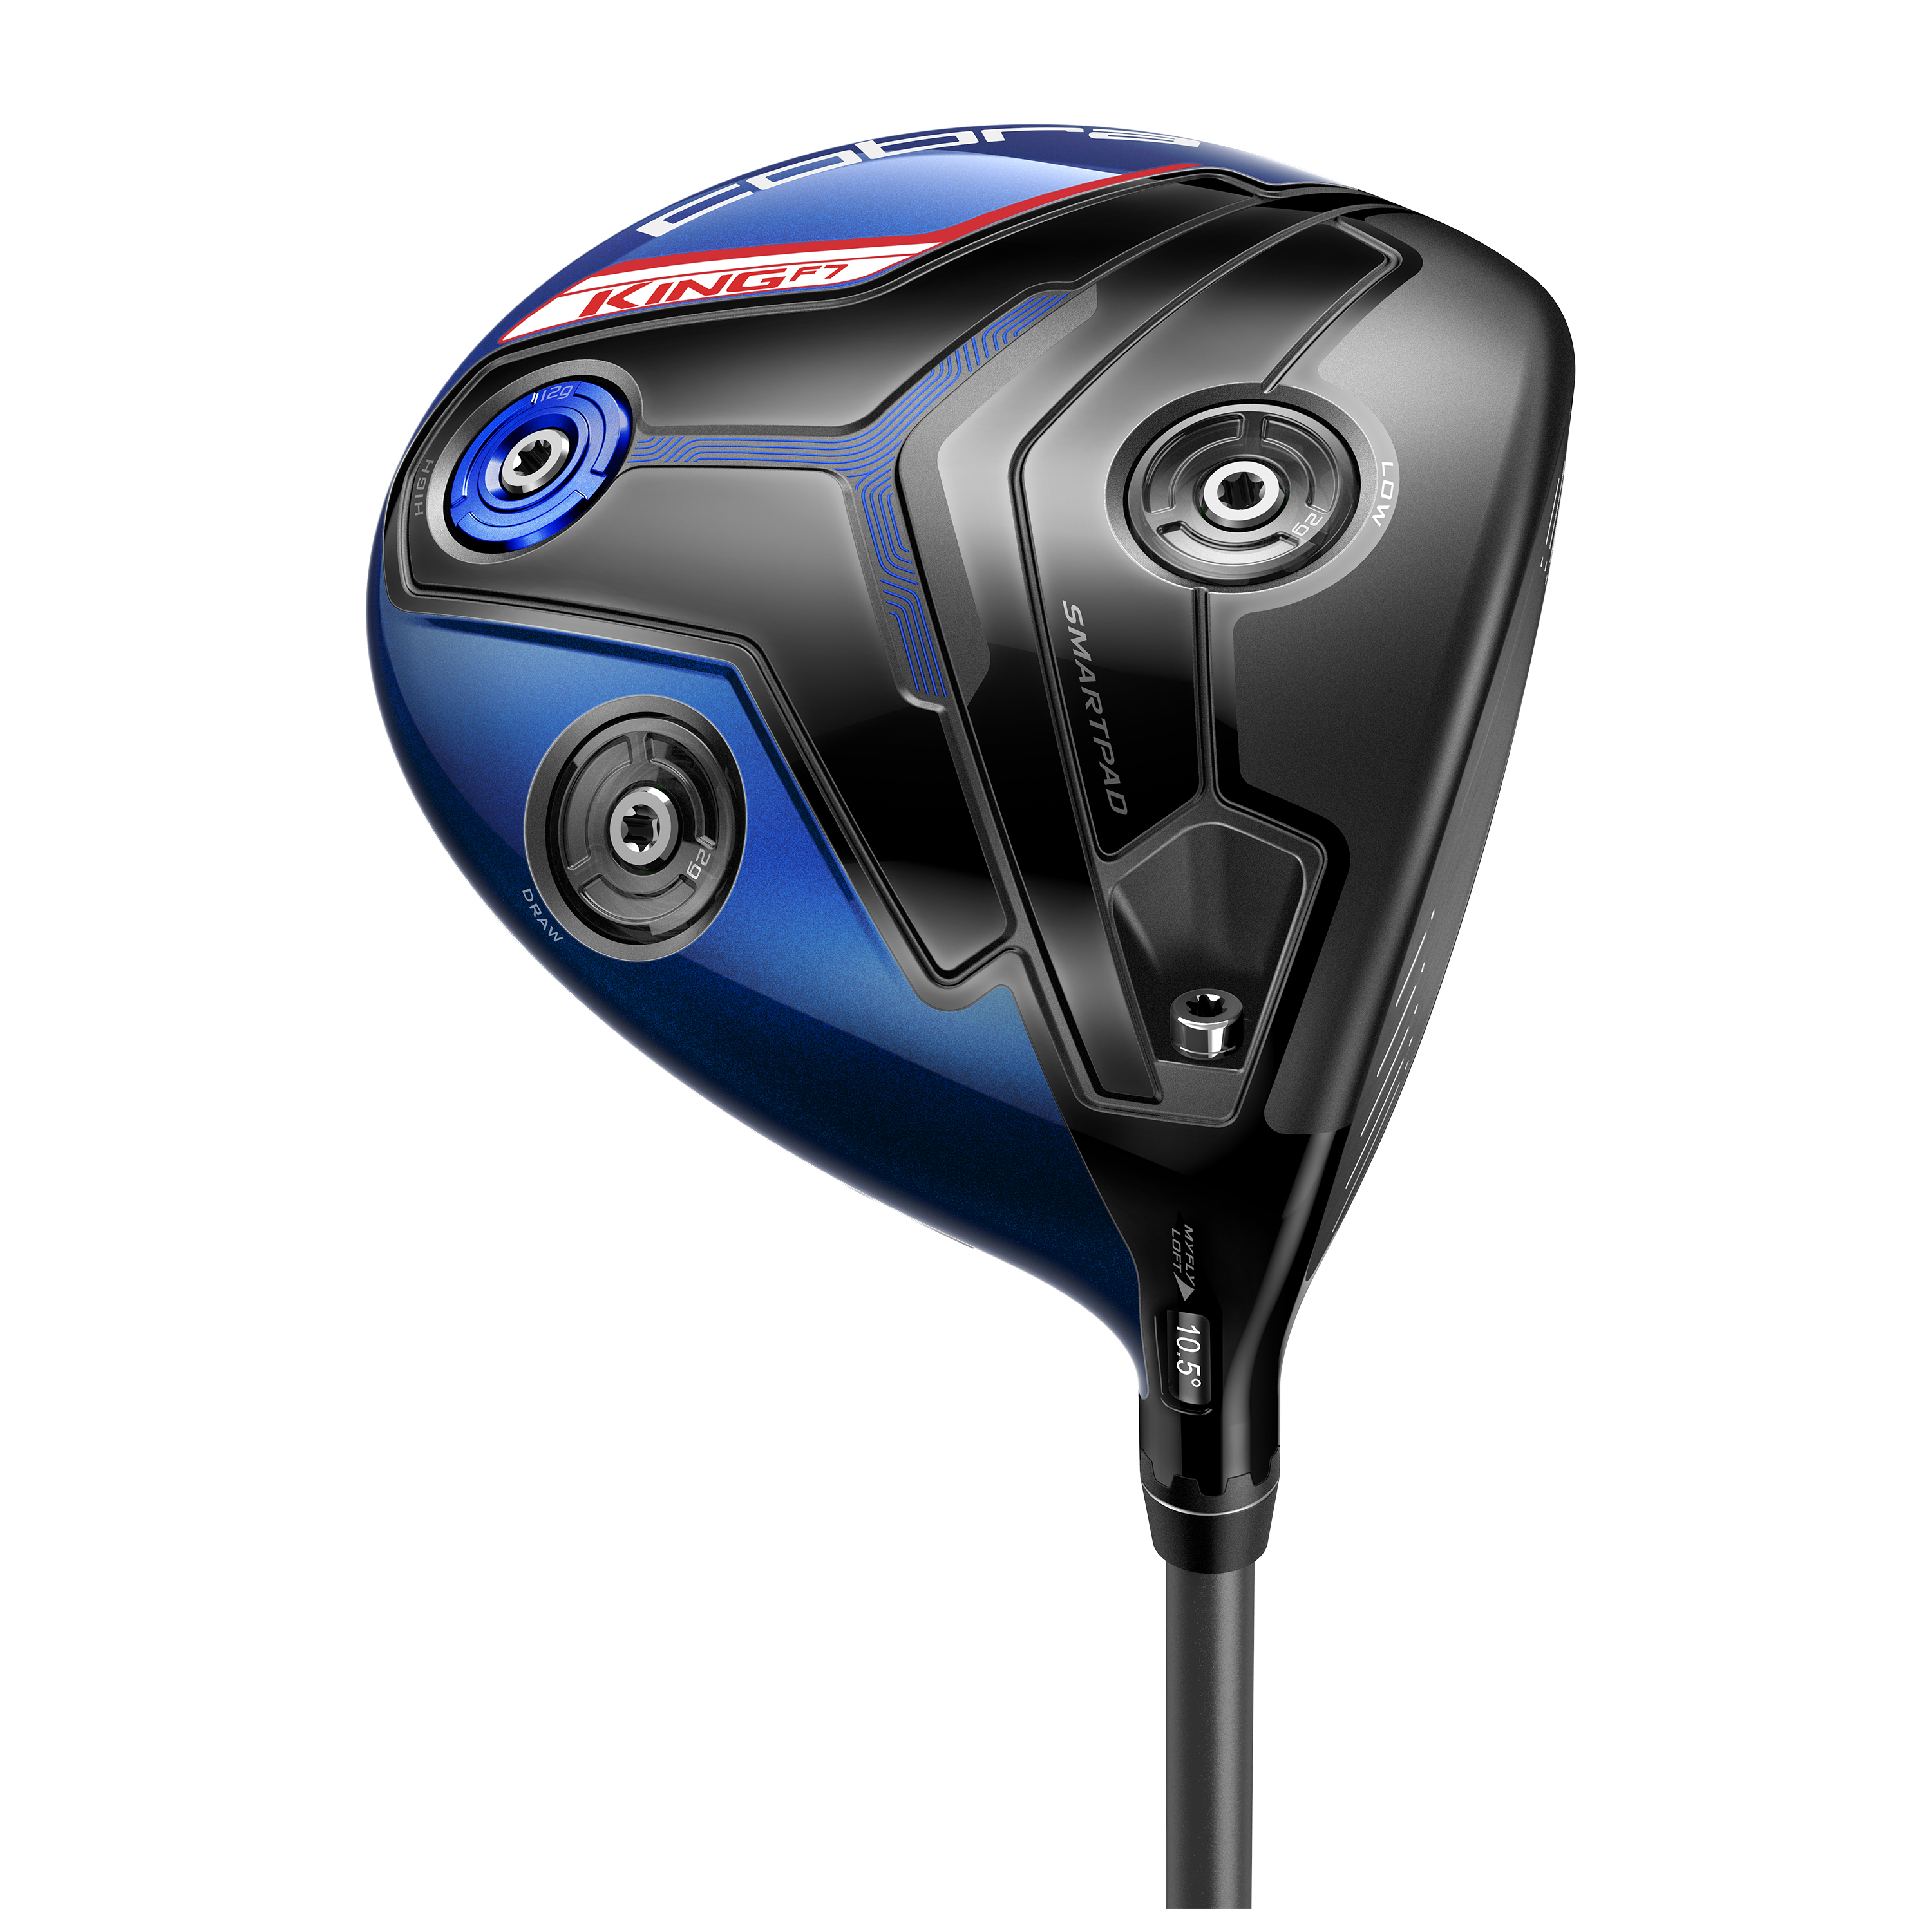 Cobra King F7 Driver Review: Adjustability in spades